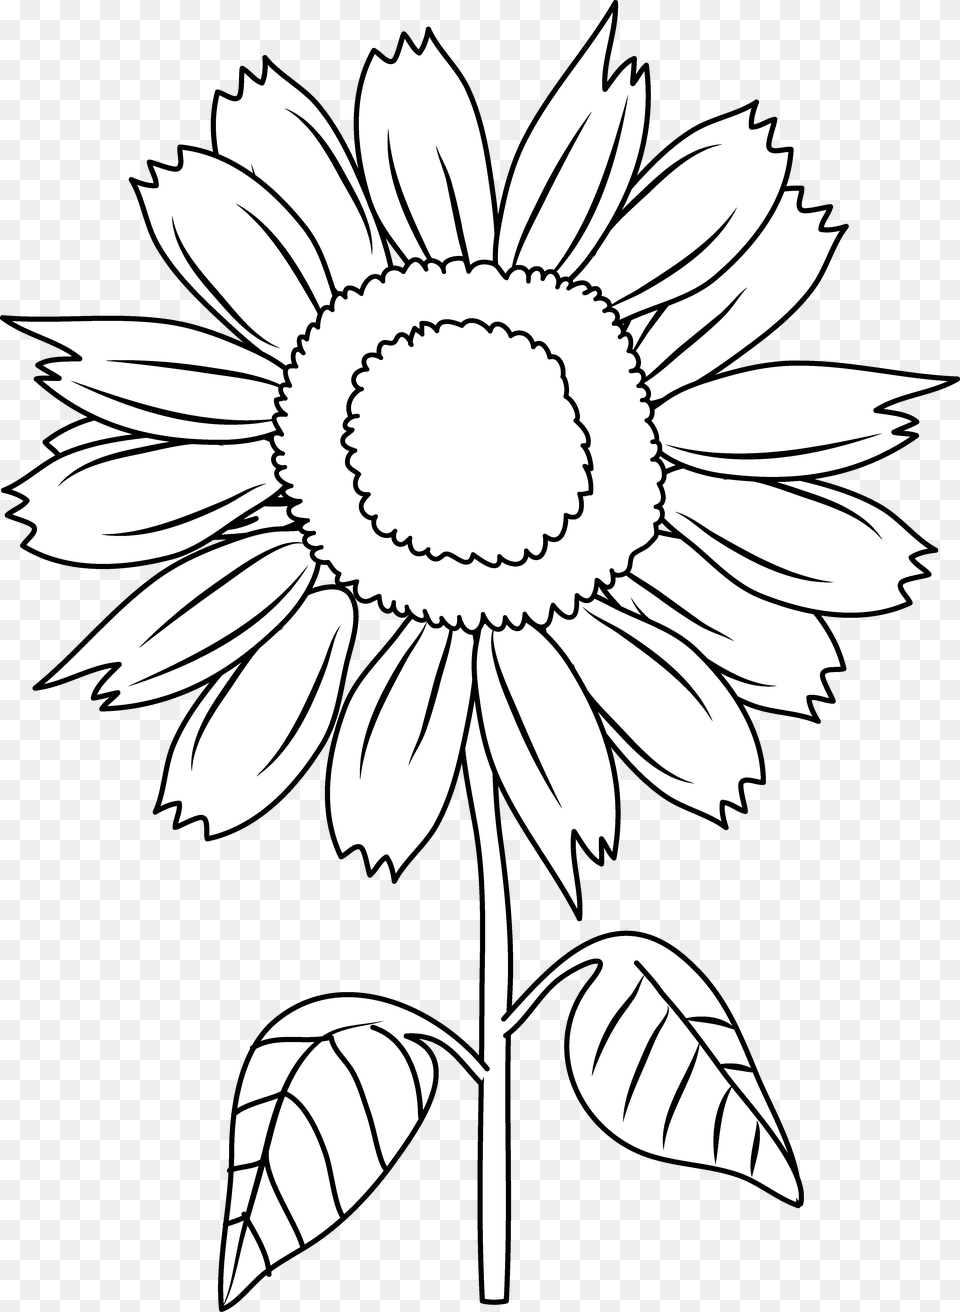 Sun Flowers Clipart Black And White Black And White Sunflower Clip Art Black And White, Flower, Daisy, Plant, Drawing Png